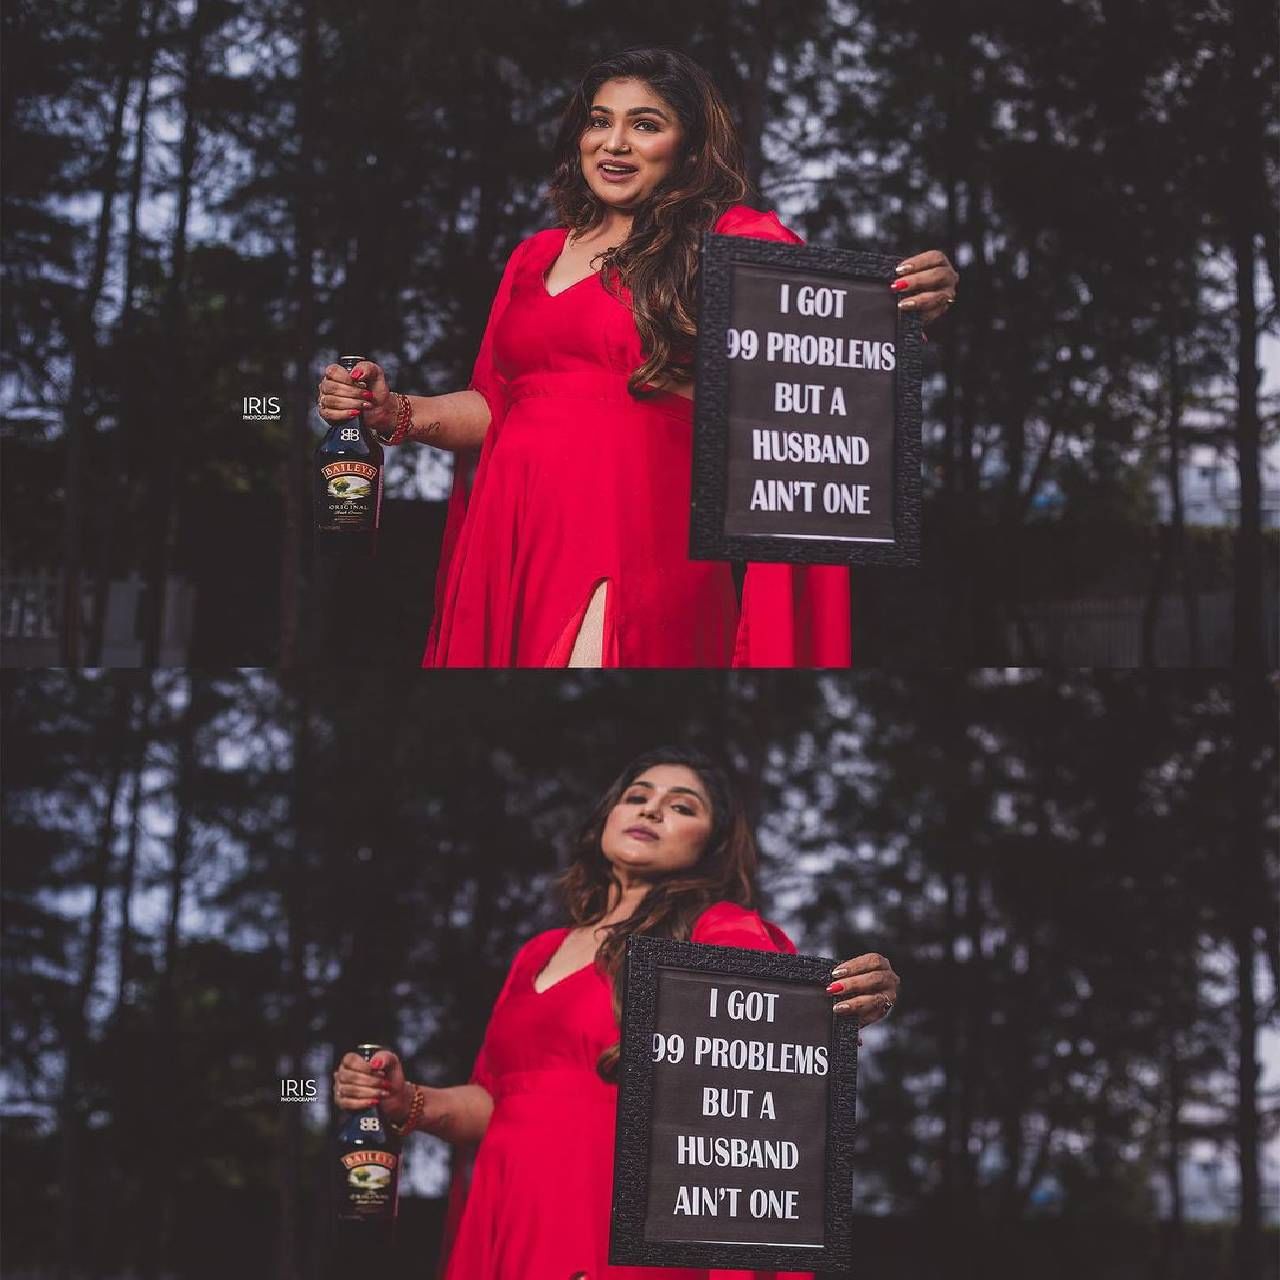 In this photograph, the woman is celebrating her divorce with a bottle of liquor in her hand.  She also has a poster in her other hand, which says in English that I have 99 problems, but no husband.